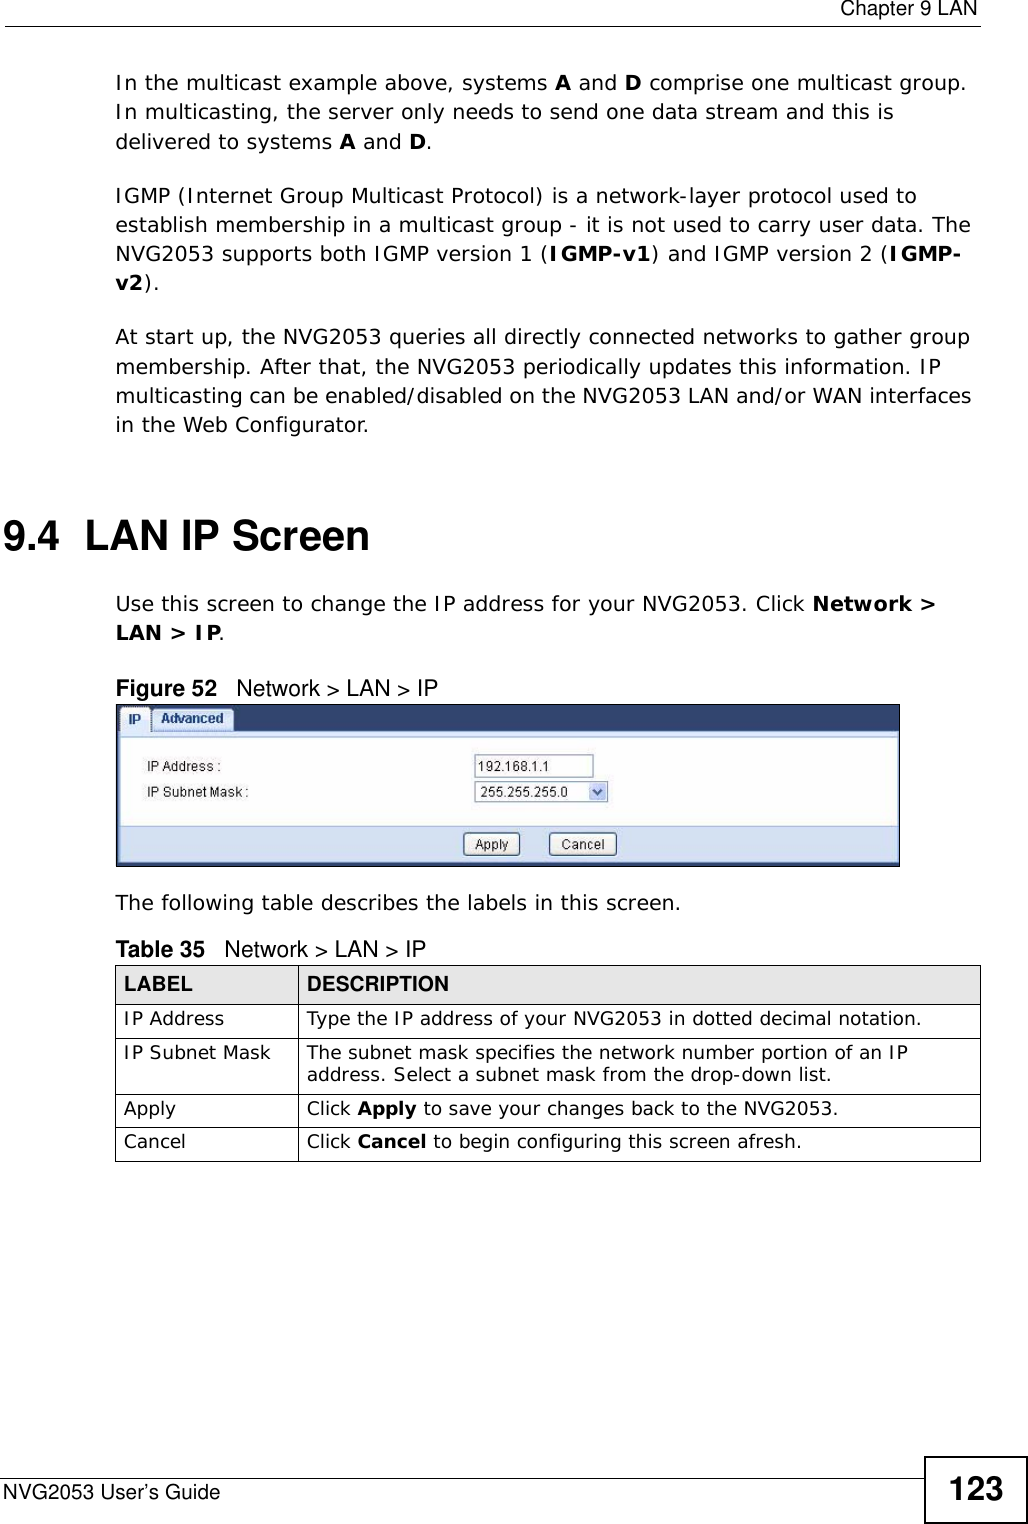  Chapter 9 LANNVG2053 User’s Guide 123In the multicast example above, systems A and D comprise one multicast group. In multicasting, the server only needs to send one data stream and this is delivered to systems A and D. IGMP (Internet Group Multicast Protocol) is a network-layer protocol used to establish membership in a multicast group - it is not used to carry user data. The NVG2053 supports both IGMP version 1 (IGMP-v1) and IGMP version 2 (IGMP-v2). At start up, the NVG2053 queries all directly connected networks to gather group membership. After that, the NVG2053 periodically updates this information. IP multicasting can be enabled/disabled on the NVG2053 LAN and/or WAN interfaces in the Web Configurator.9.4  LAN IP ScreenUse this screen to change the IP address for your NVG2053. Click Network &gt; LAN &gt; IP.Figure 52   Network &gt; LAN &gt; IP The following table describes the labels in this screen.Table 35   Network &gt; LAN &gt; IPLABEL DESCRIPTIONIP Address Type the IP address of your NVG2053 in dotted decimal notation.IP Subnet Mask The subnet mask specifies the network number portion of an IP address. Select a subnet mask from the drop-down list.Apply Click Apply to save your changes back to the NVG2053.Cancel Click Cancel to begin configuring this screen afresh.